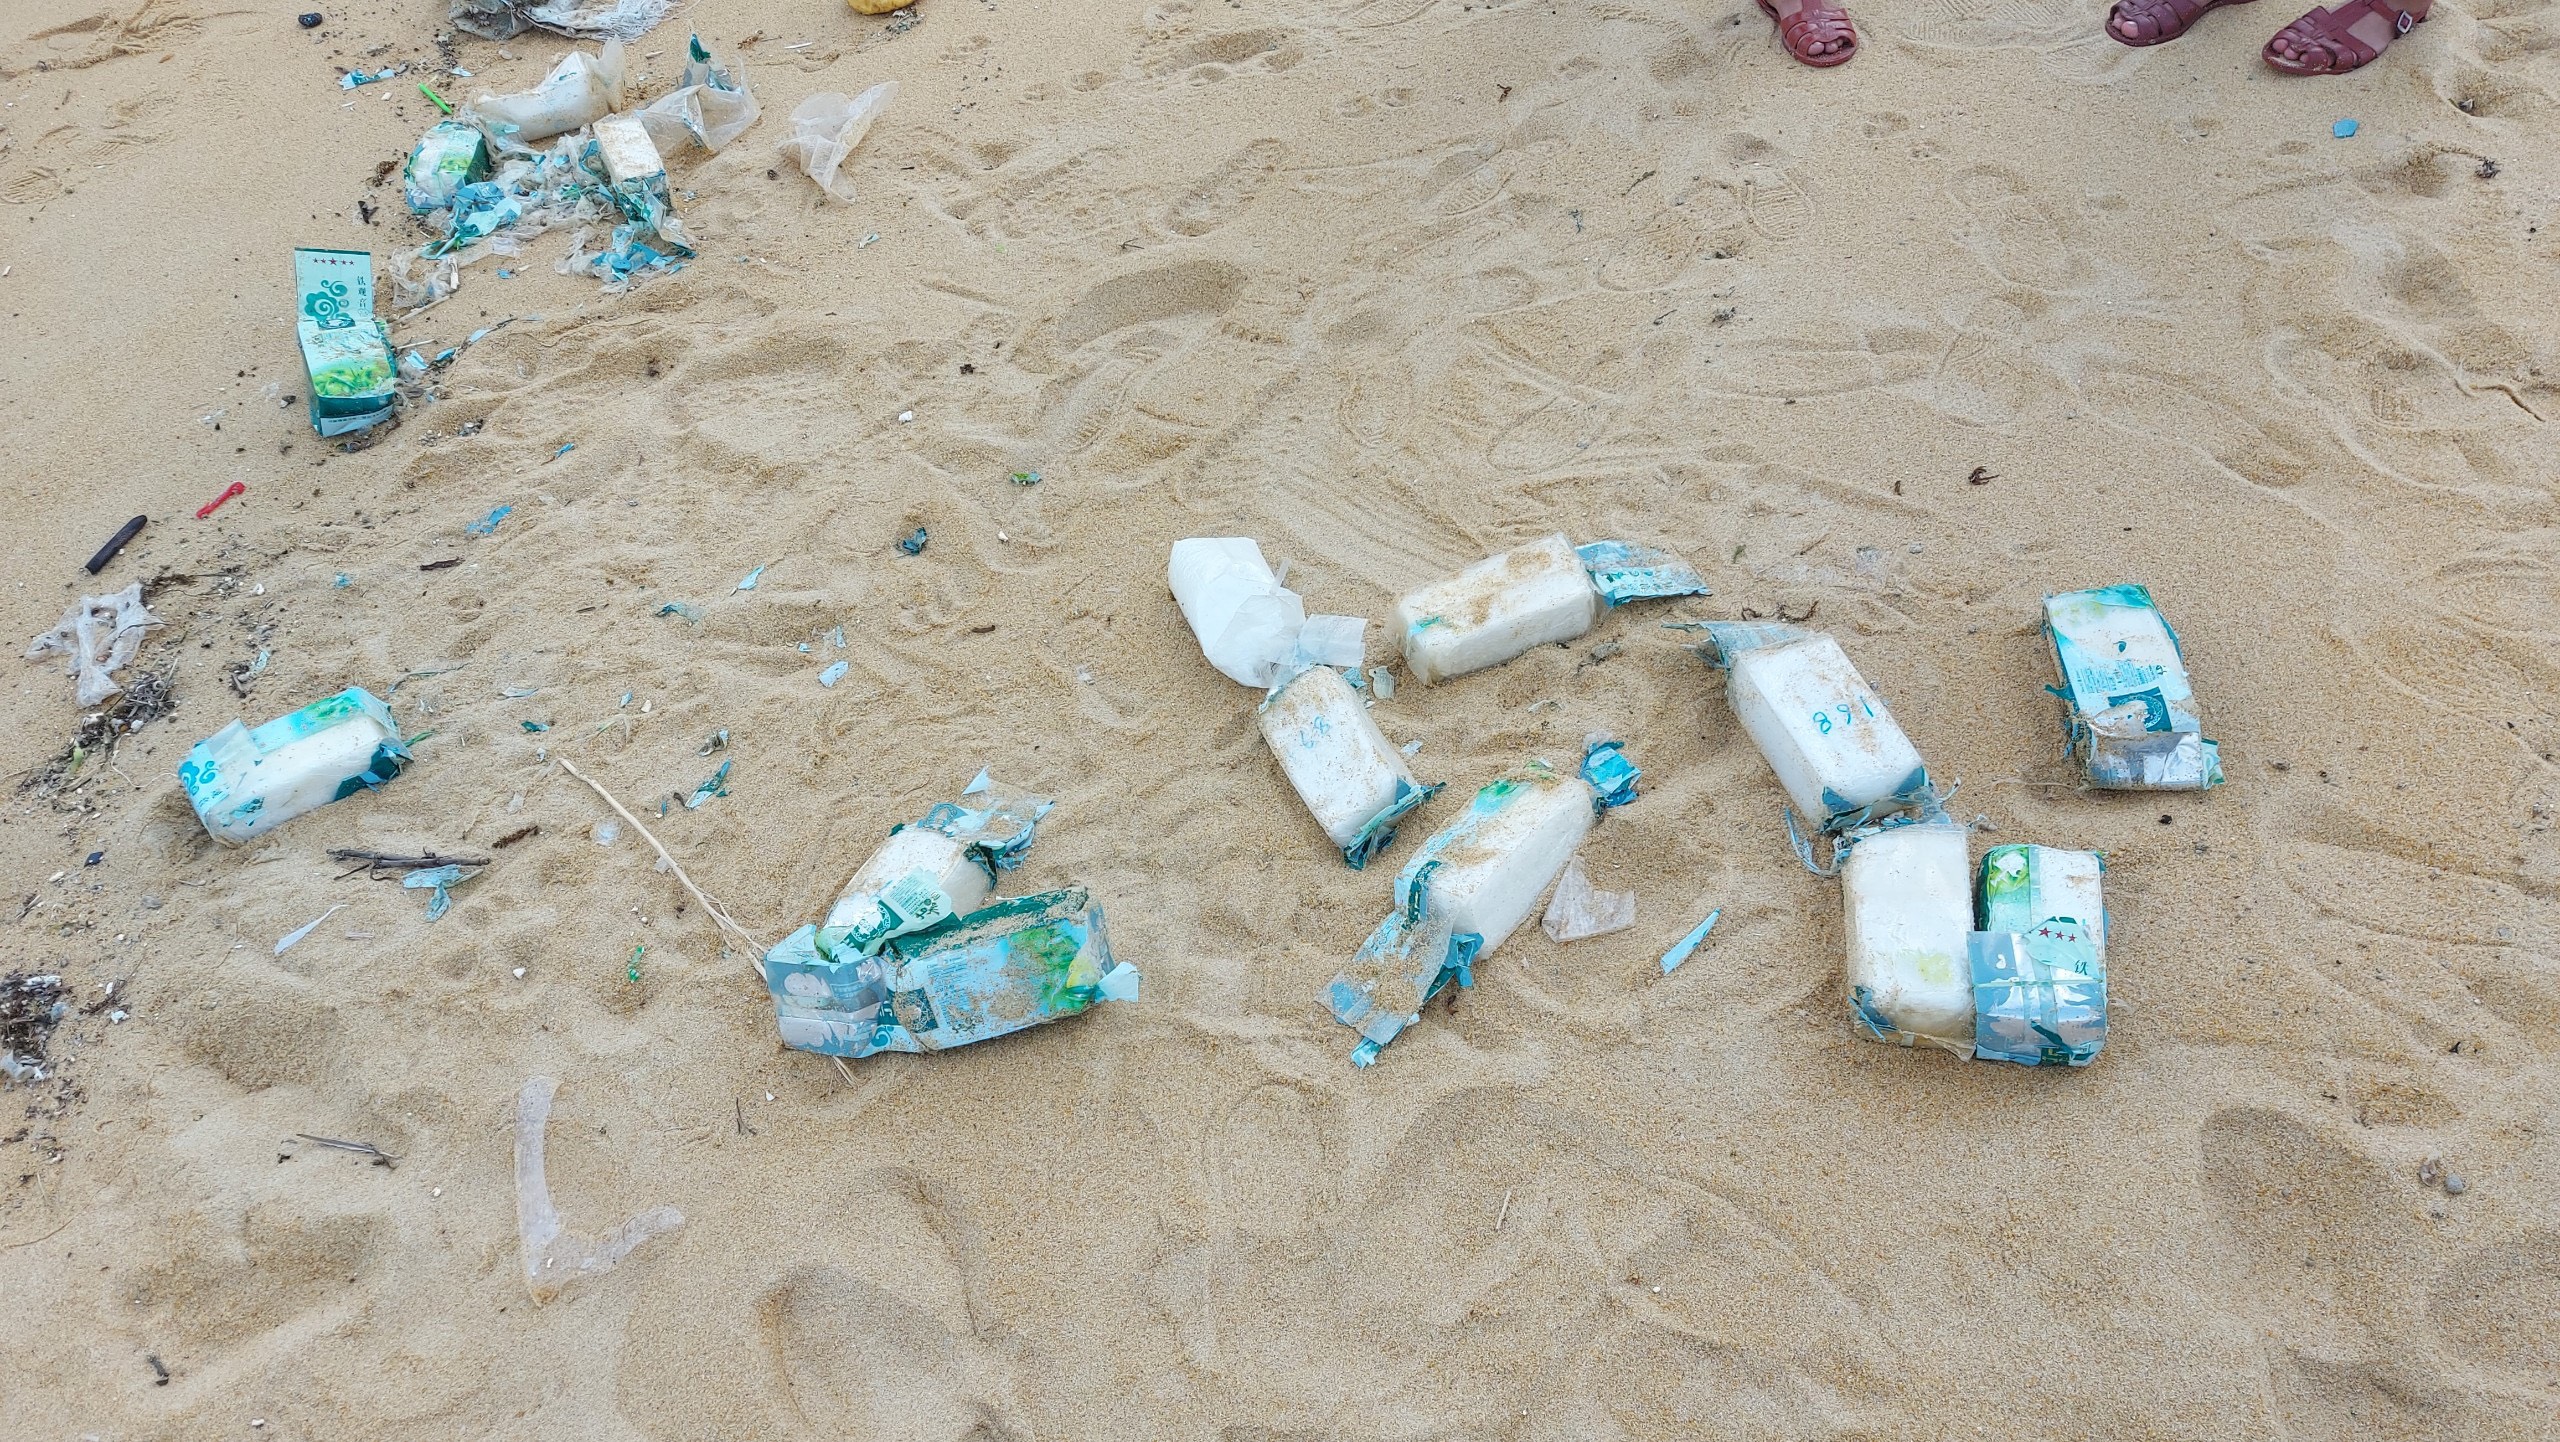 Bags of narcotics wash up on a beach in Quang Ngai Province, Vietnam, December 5, 2022. Photo: V.T. / Tuoi Tre